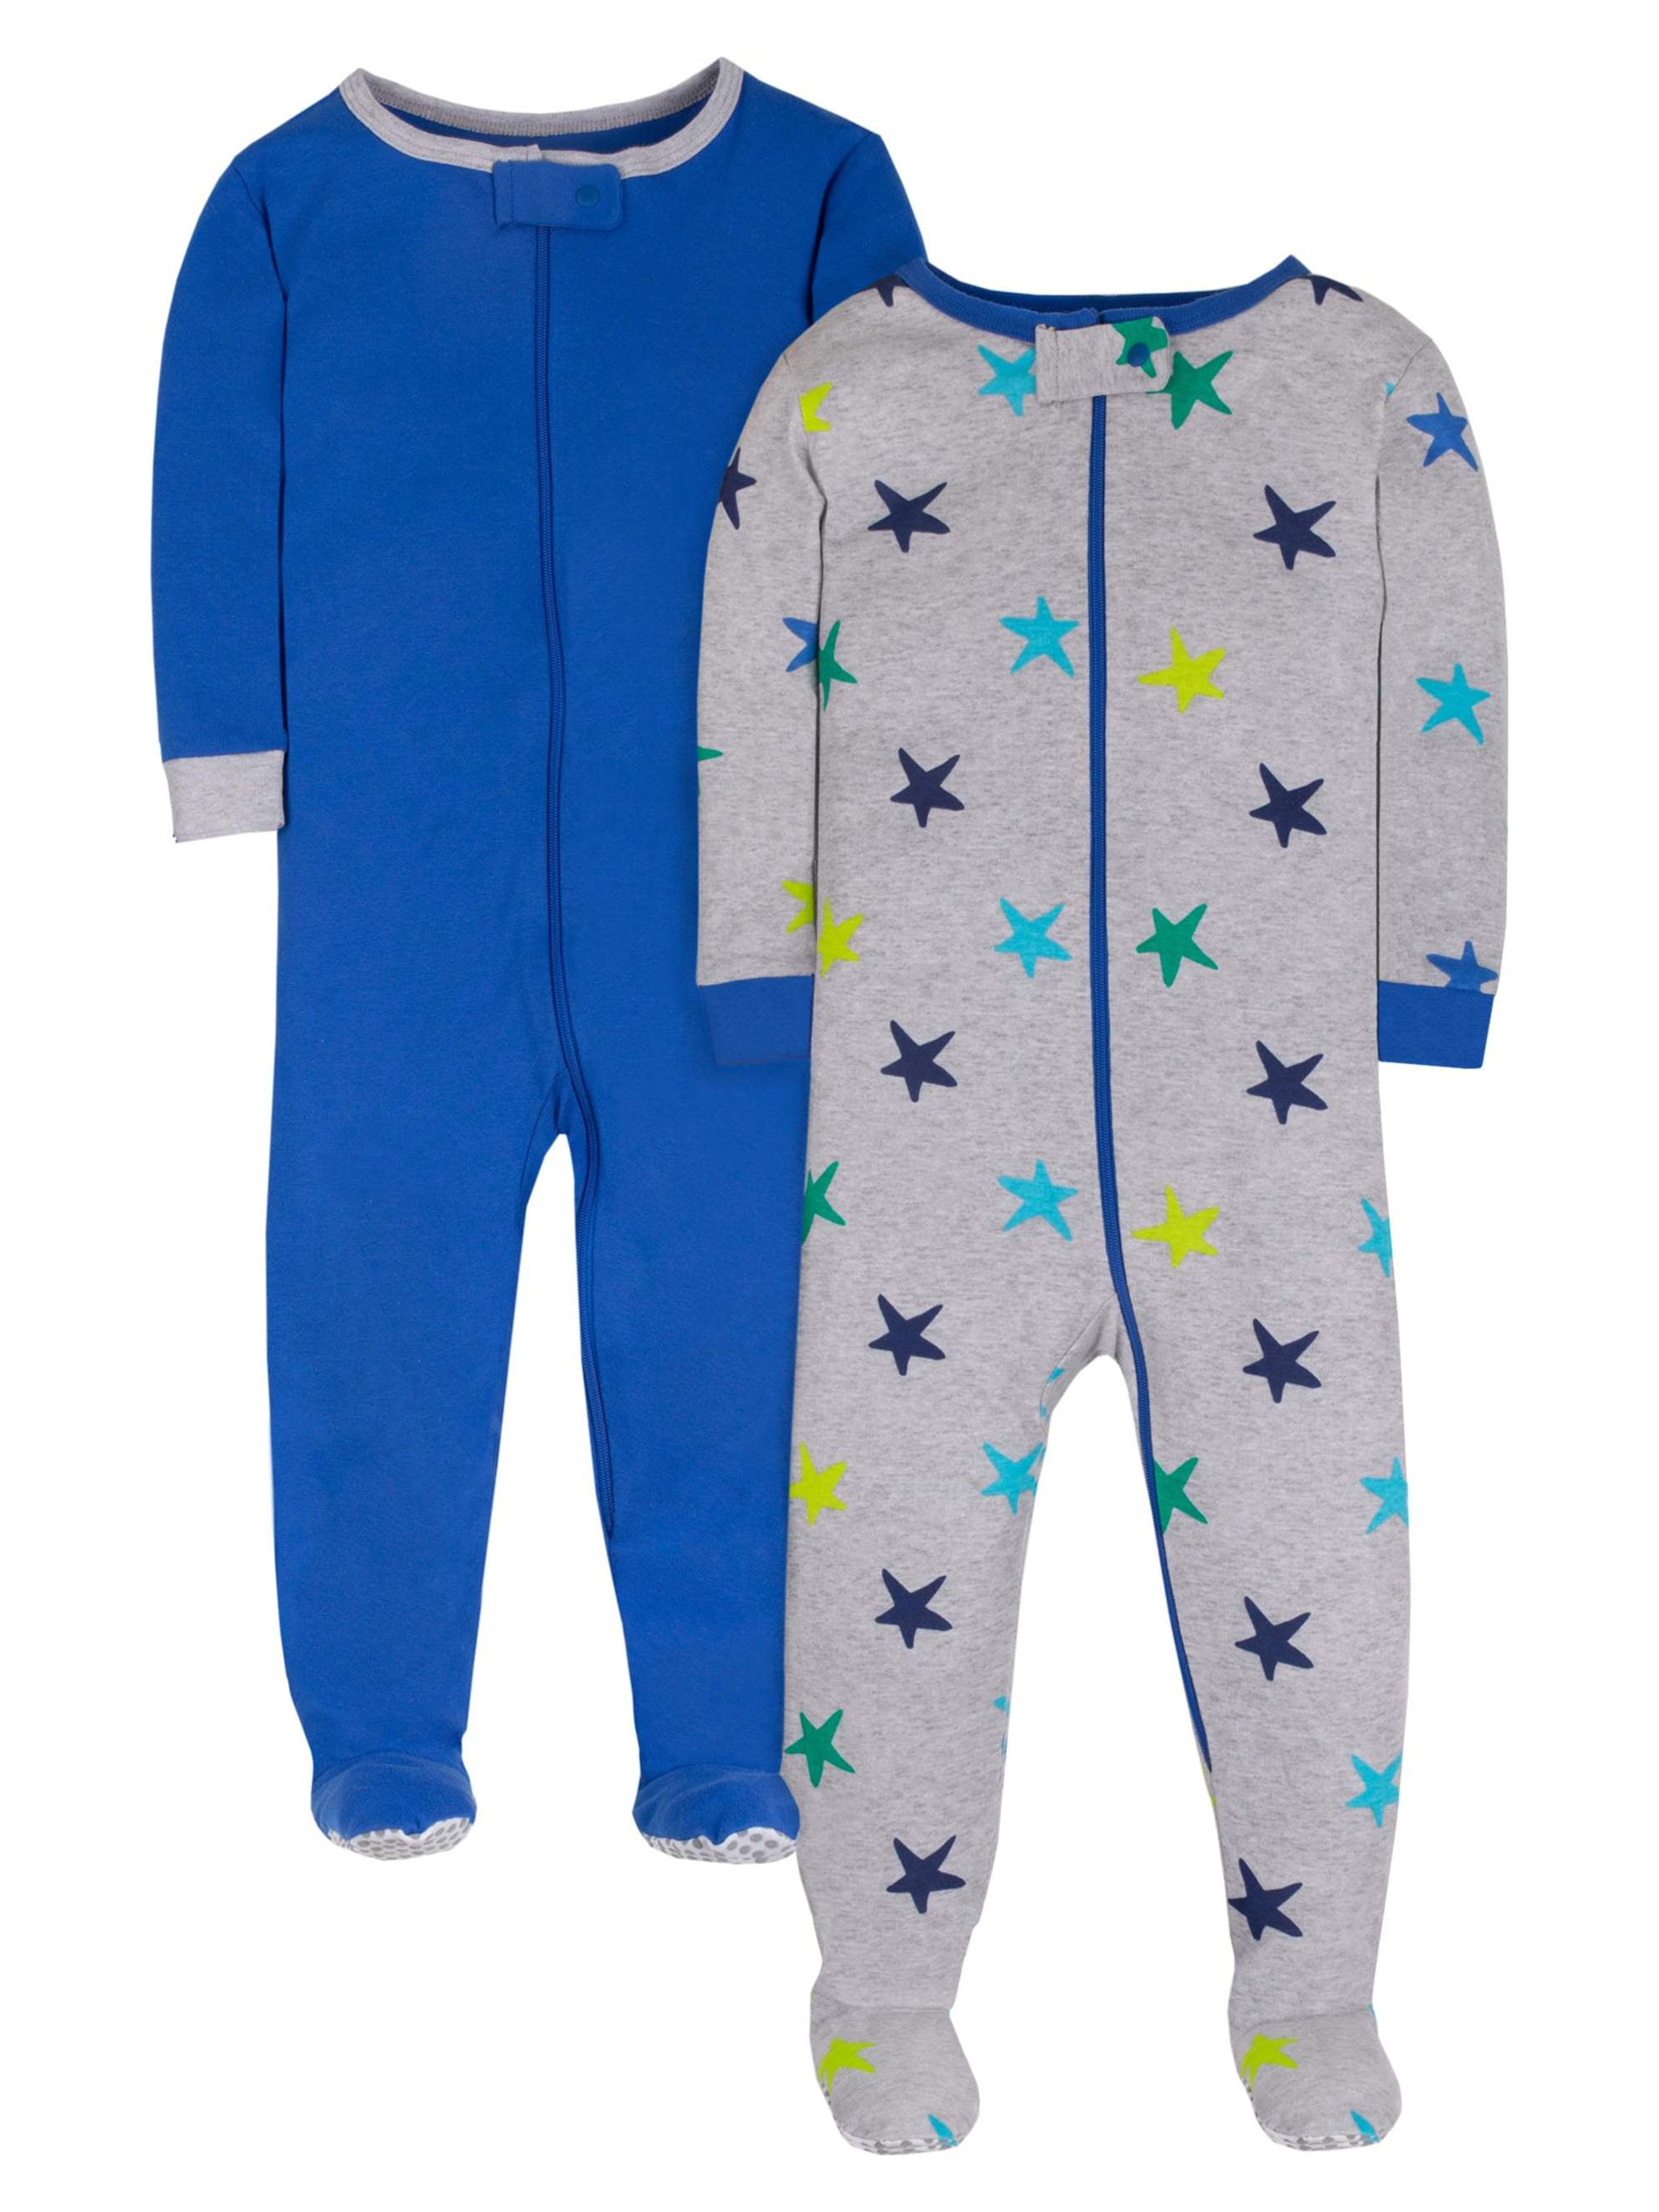 Little Star Organic Toddler Boy 2Pk Footed Stretchie Pajamas, Size NB-5T - image 1 of 7